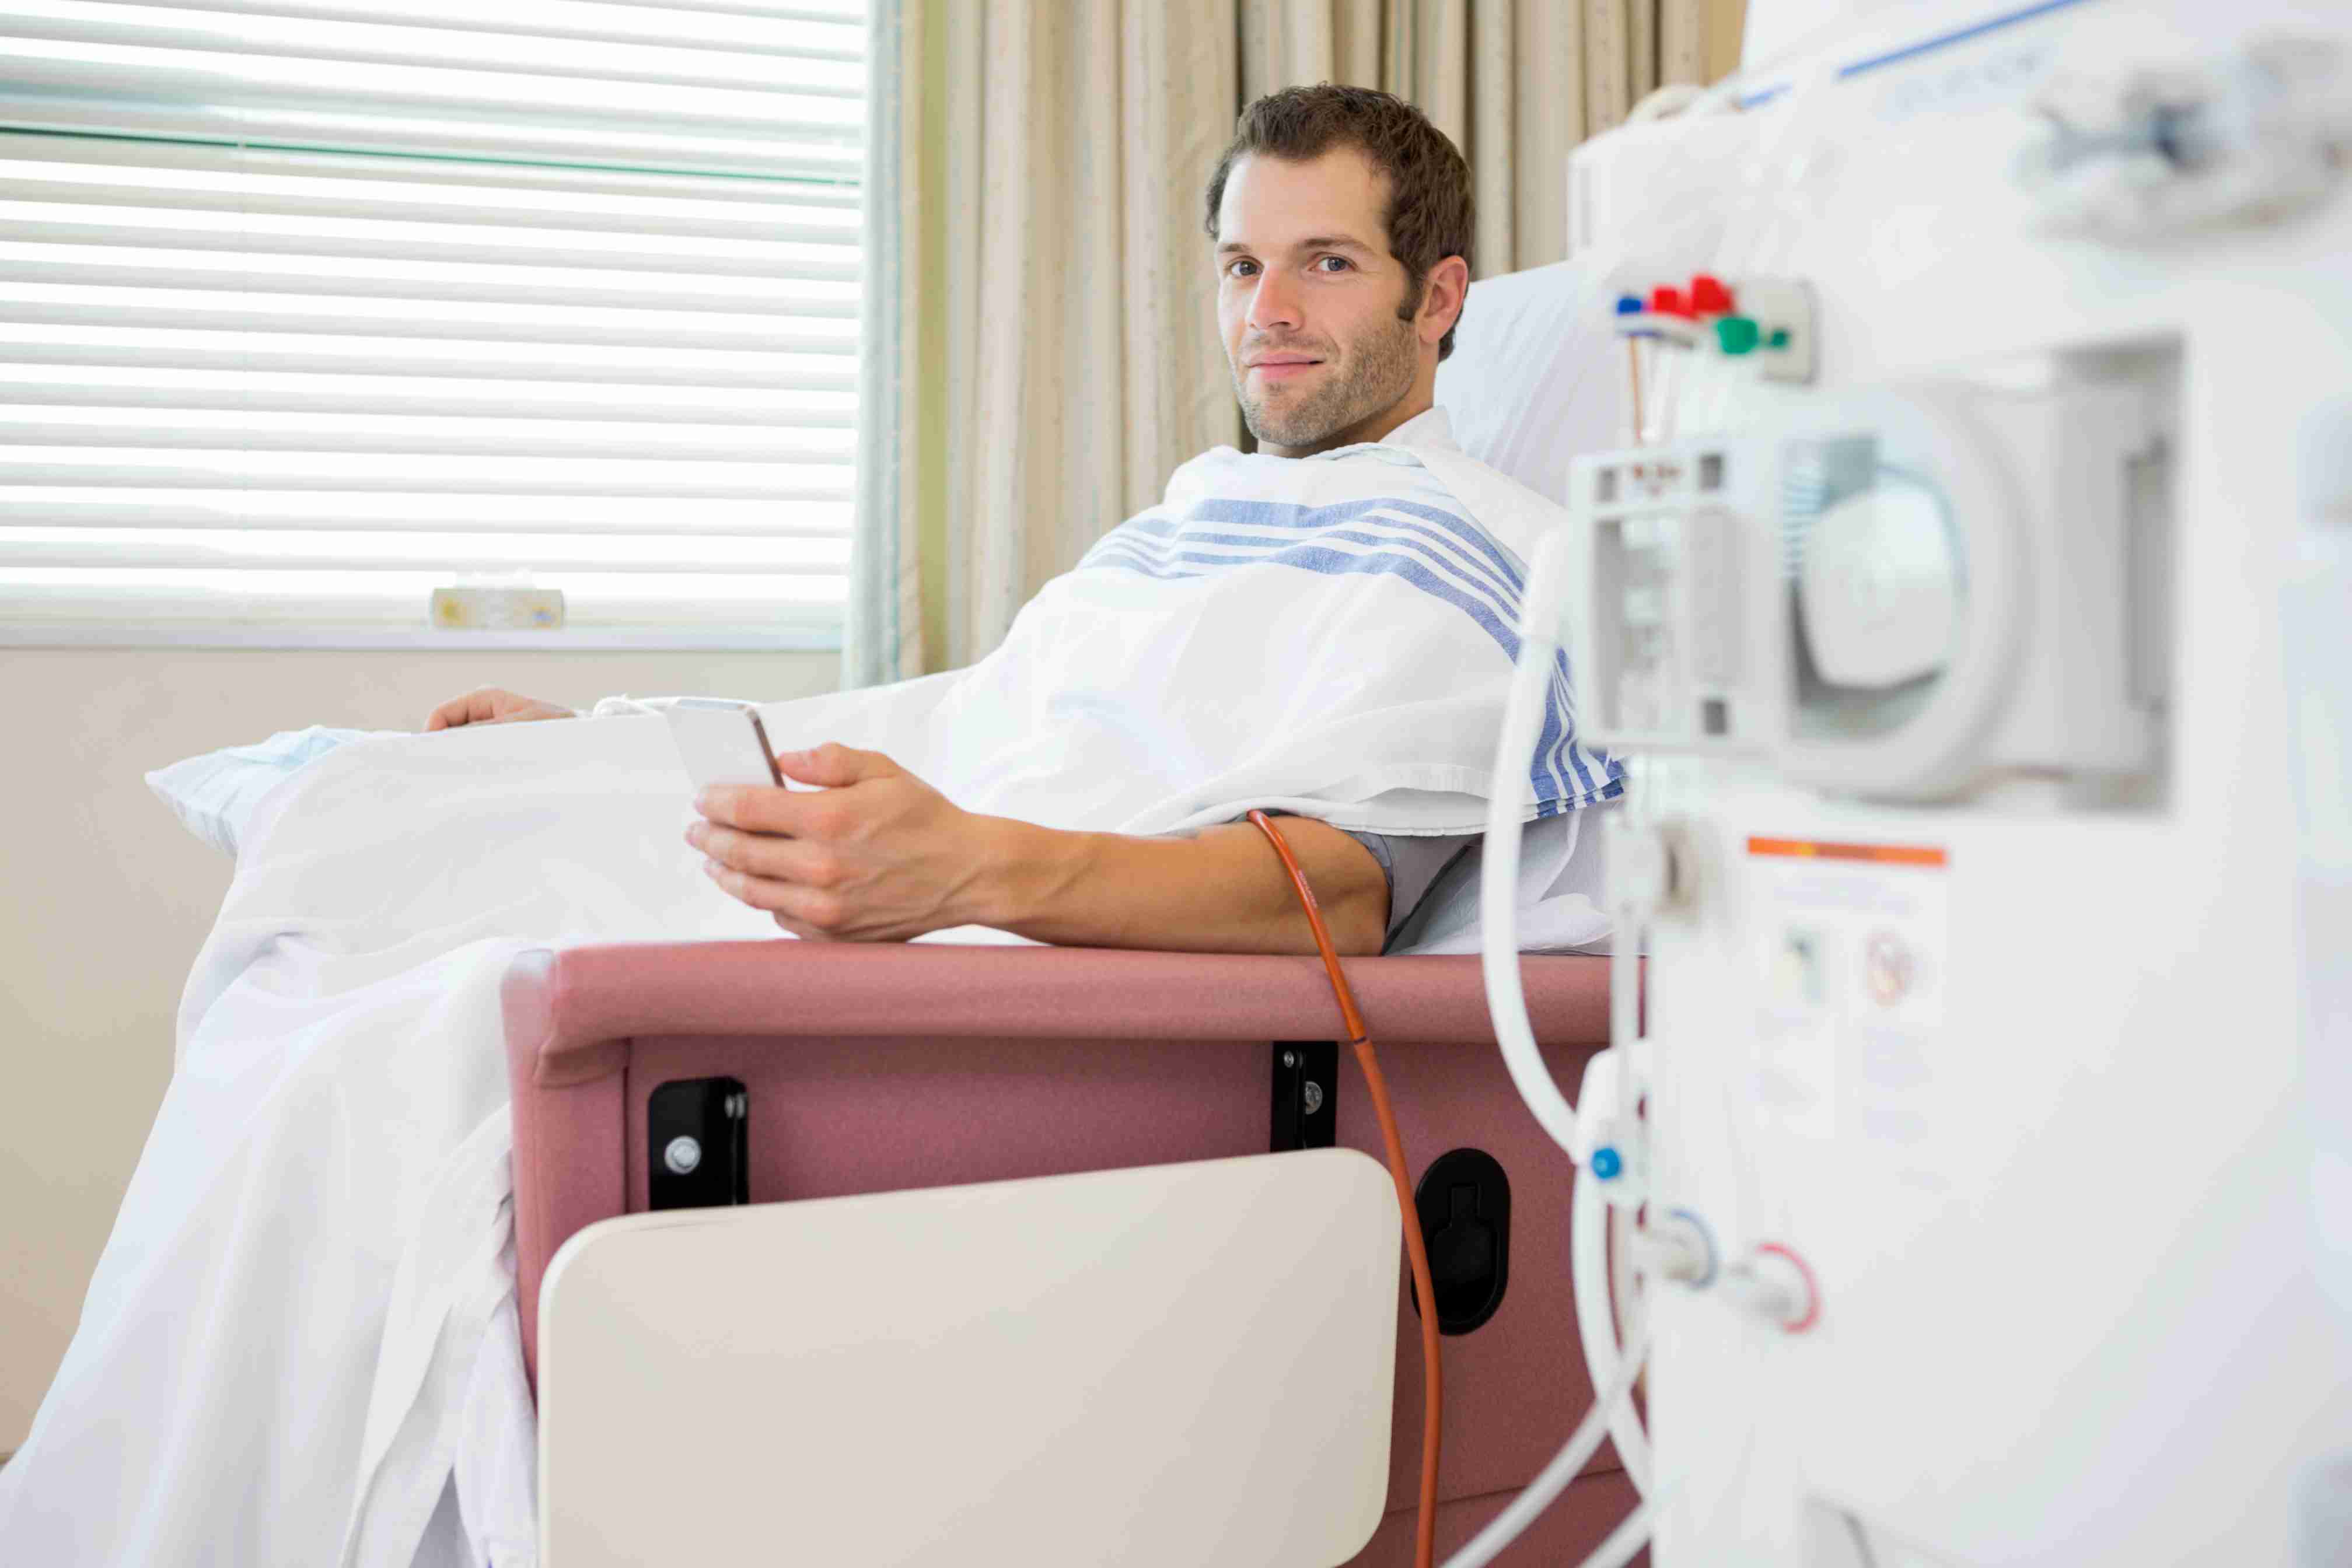 Home Hemodialysis at American Hospital: Enhancing Quality of Life through Personalized Care